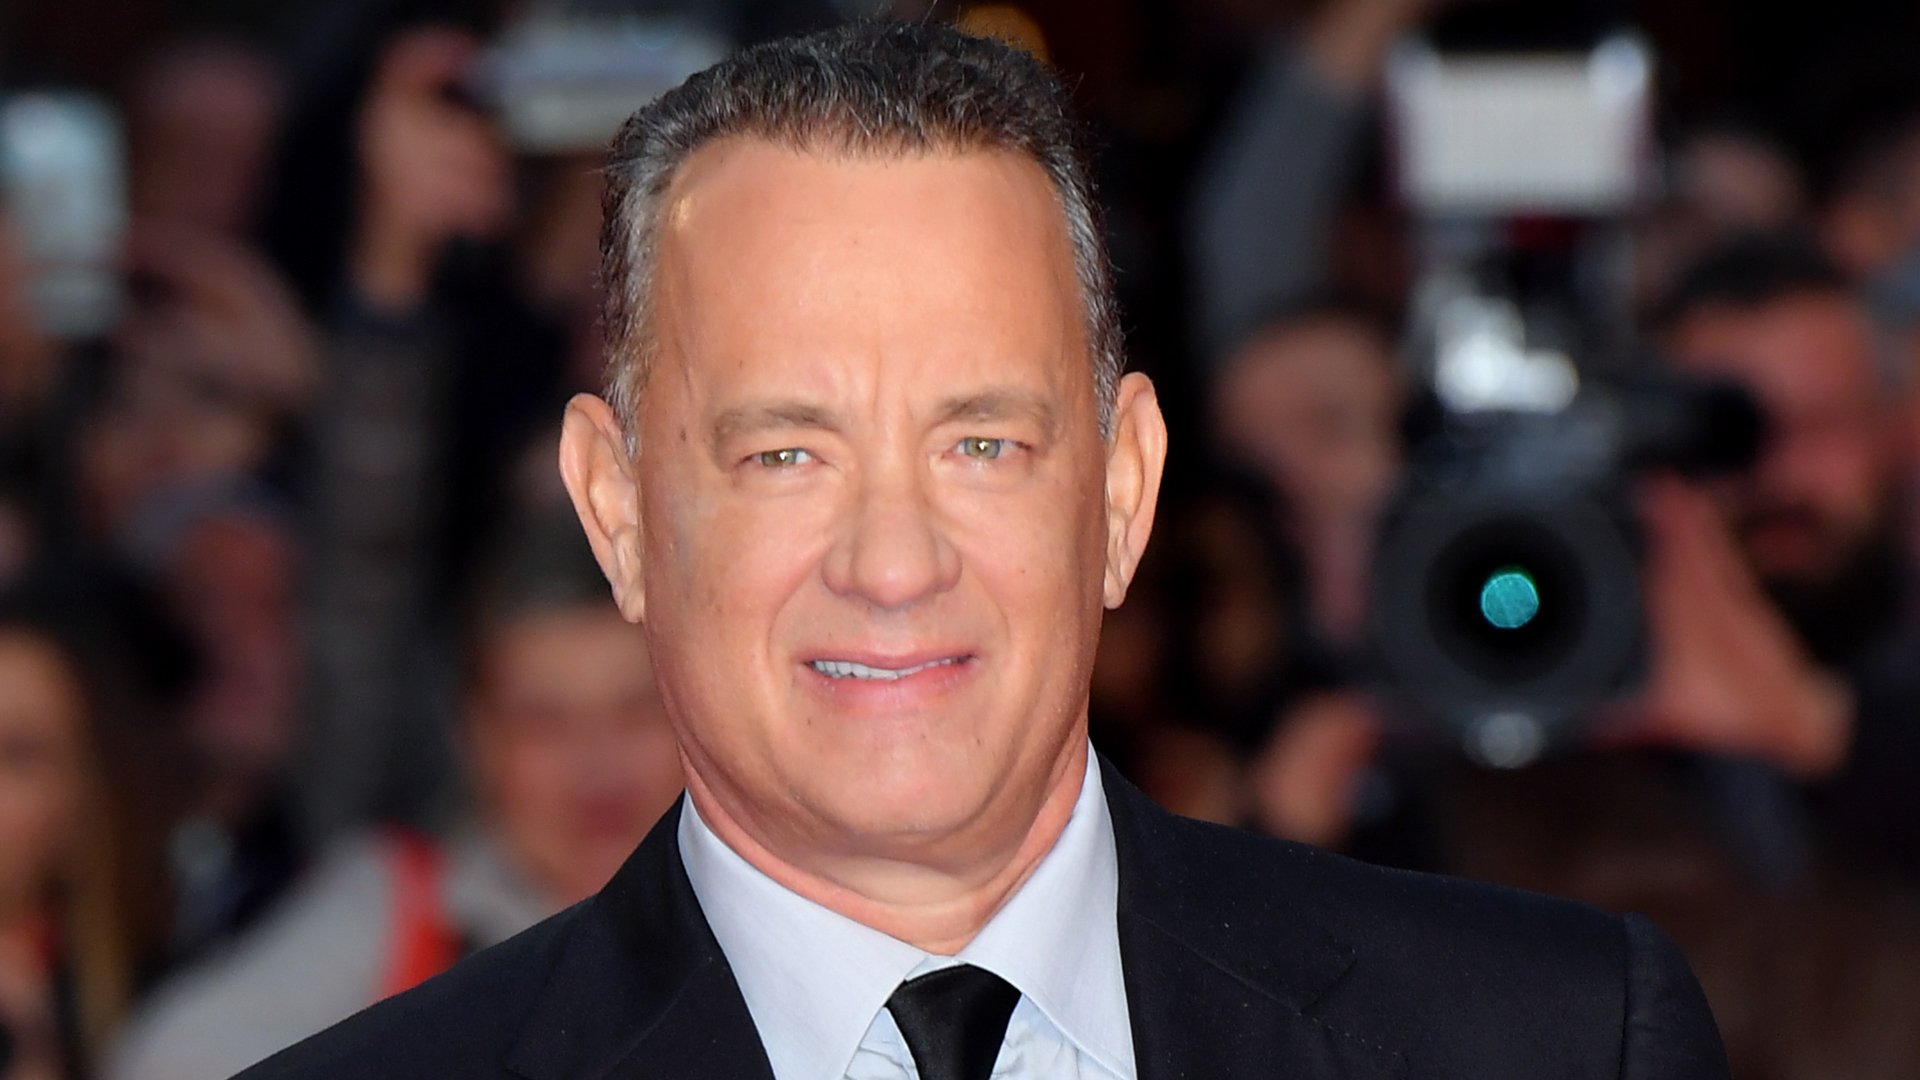 The Richest of the Rich: See How Much Tom Hanks and More A-List Movie Stars Are Worth